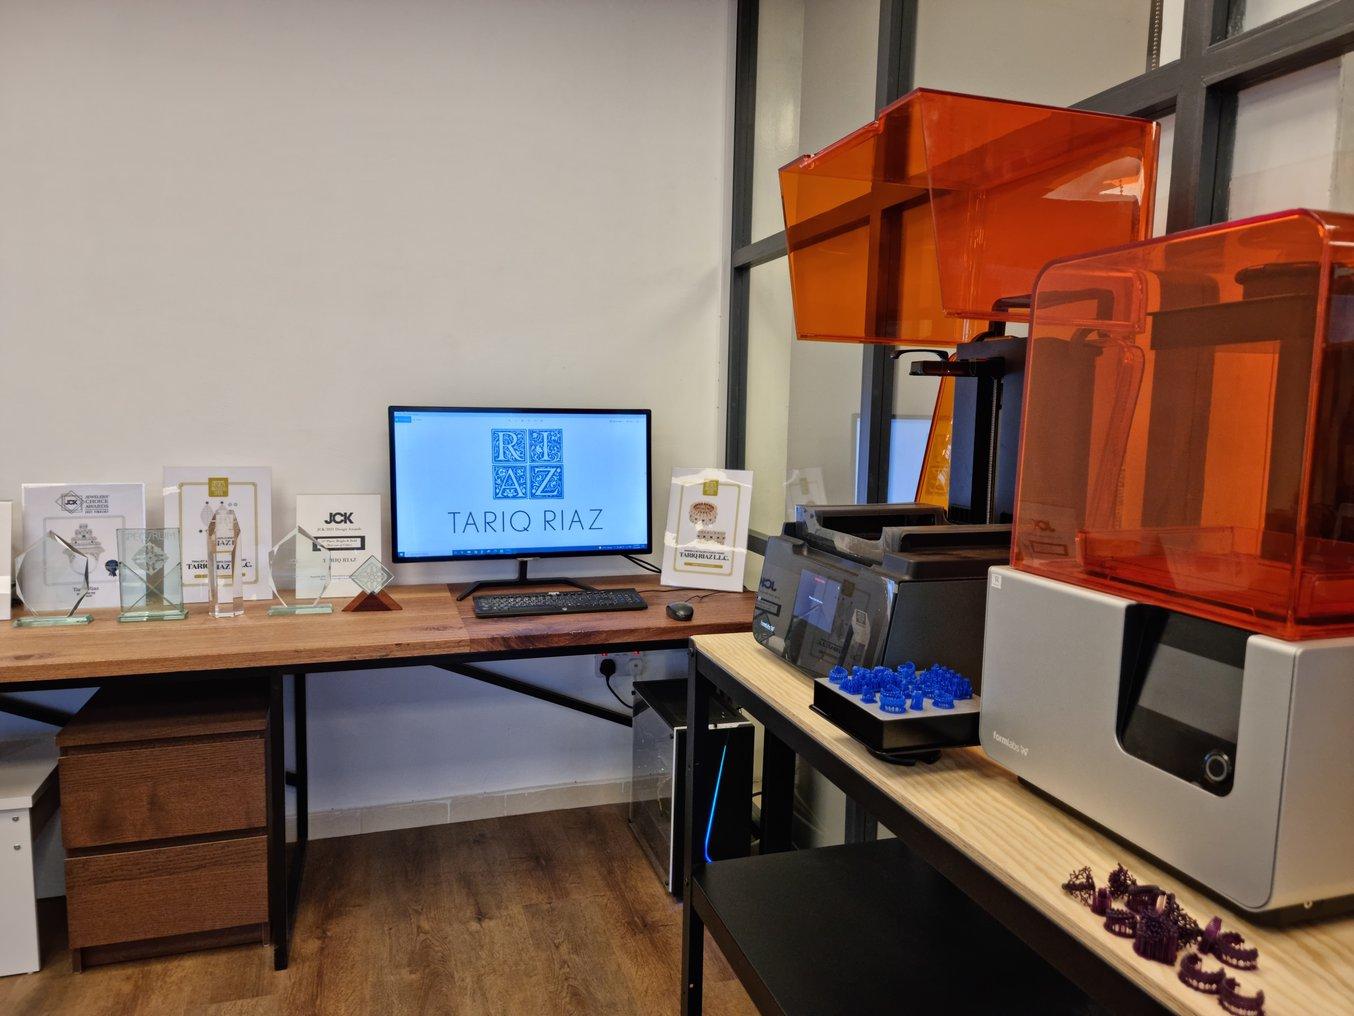 Riaz's workshop features several Form 3 SLA 3D printers and a variety of resins.